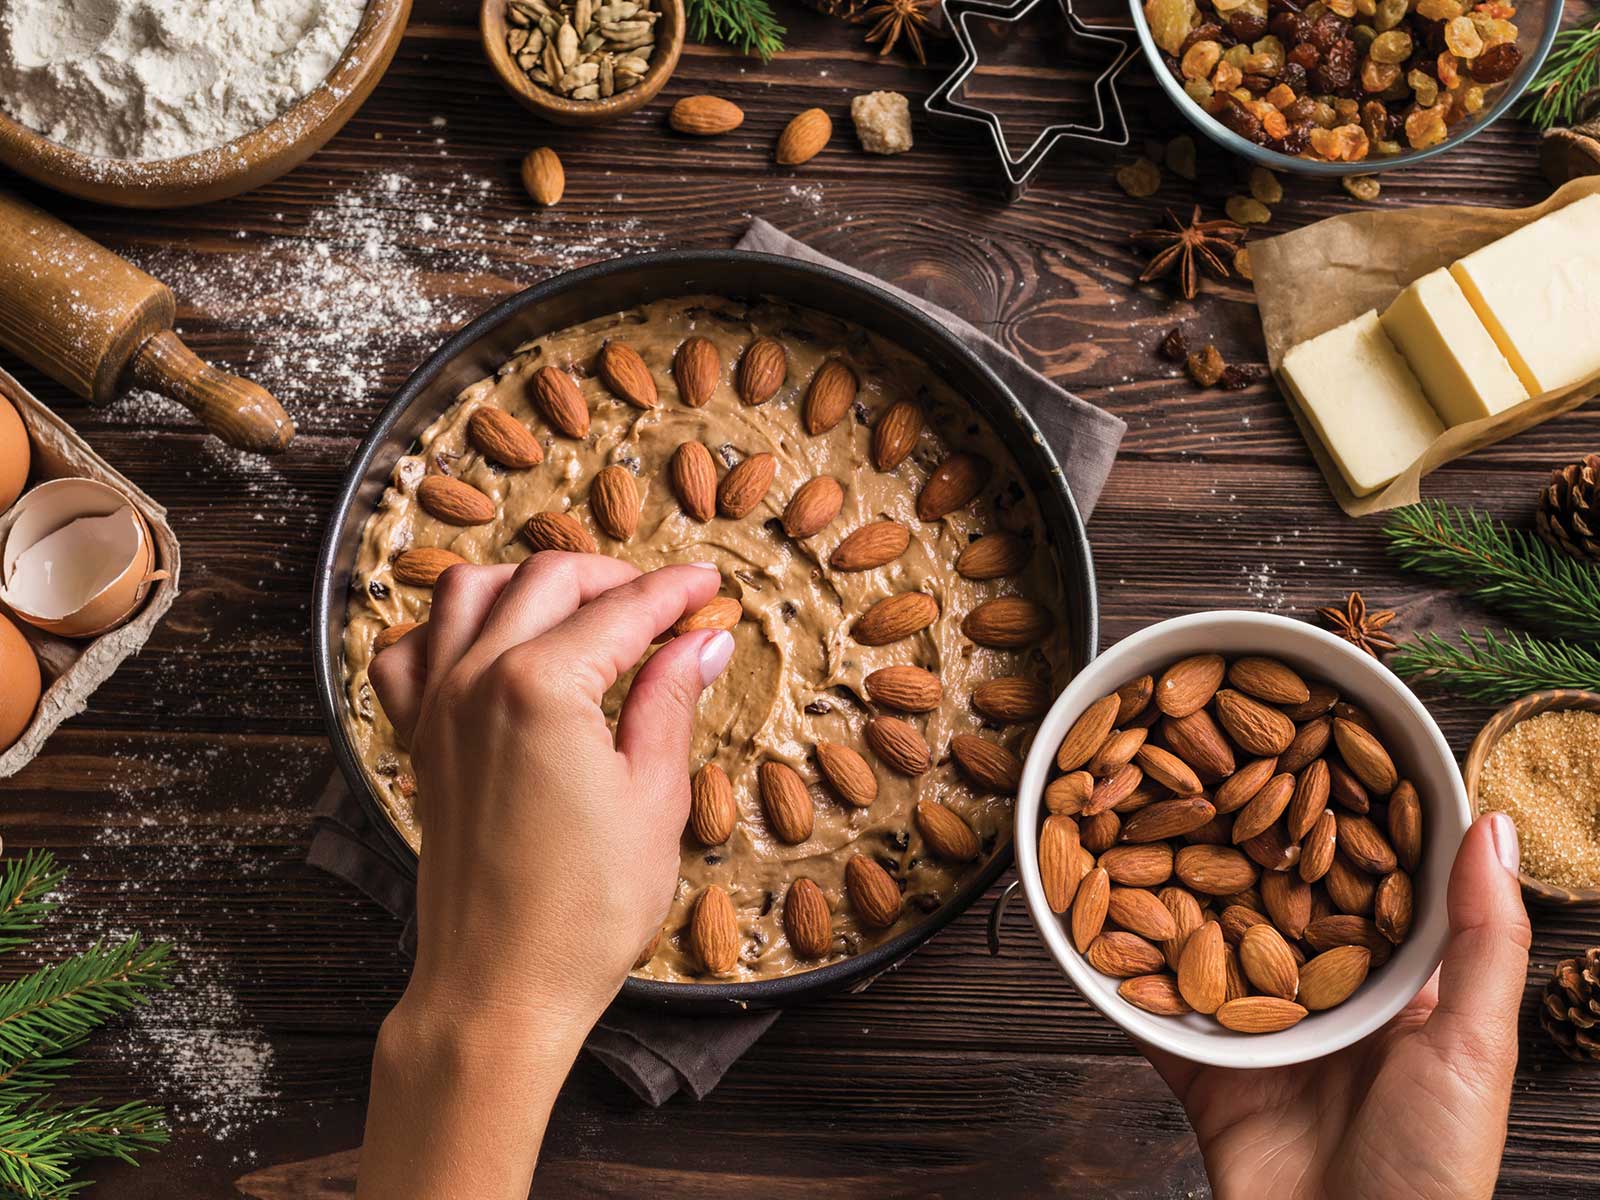 Holiday baking with almonds